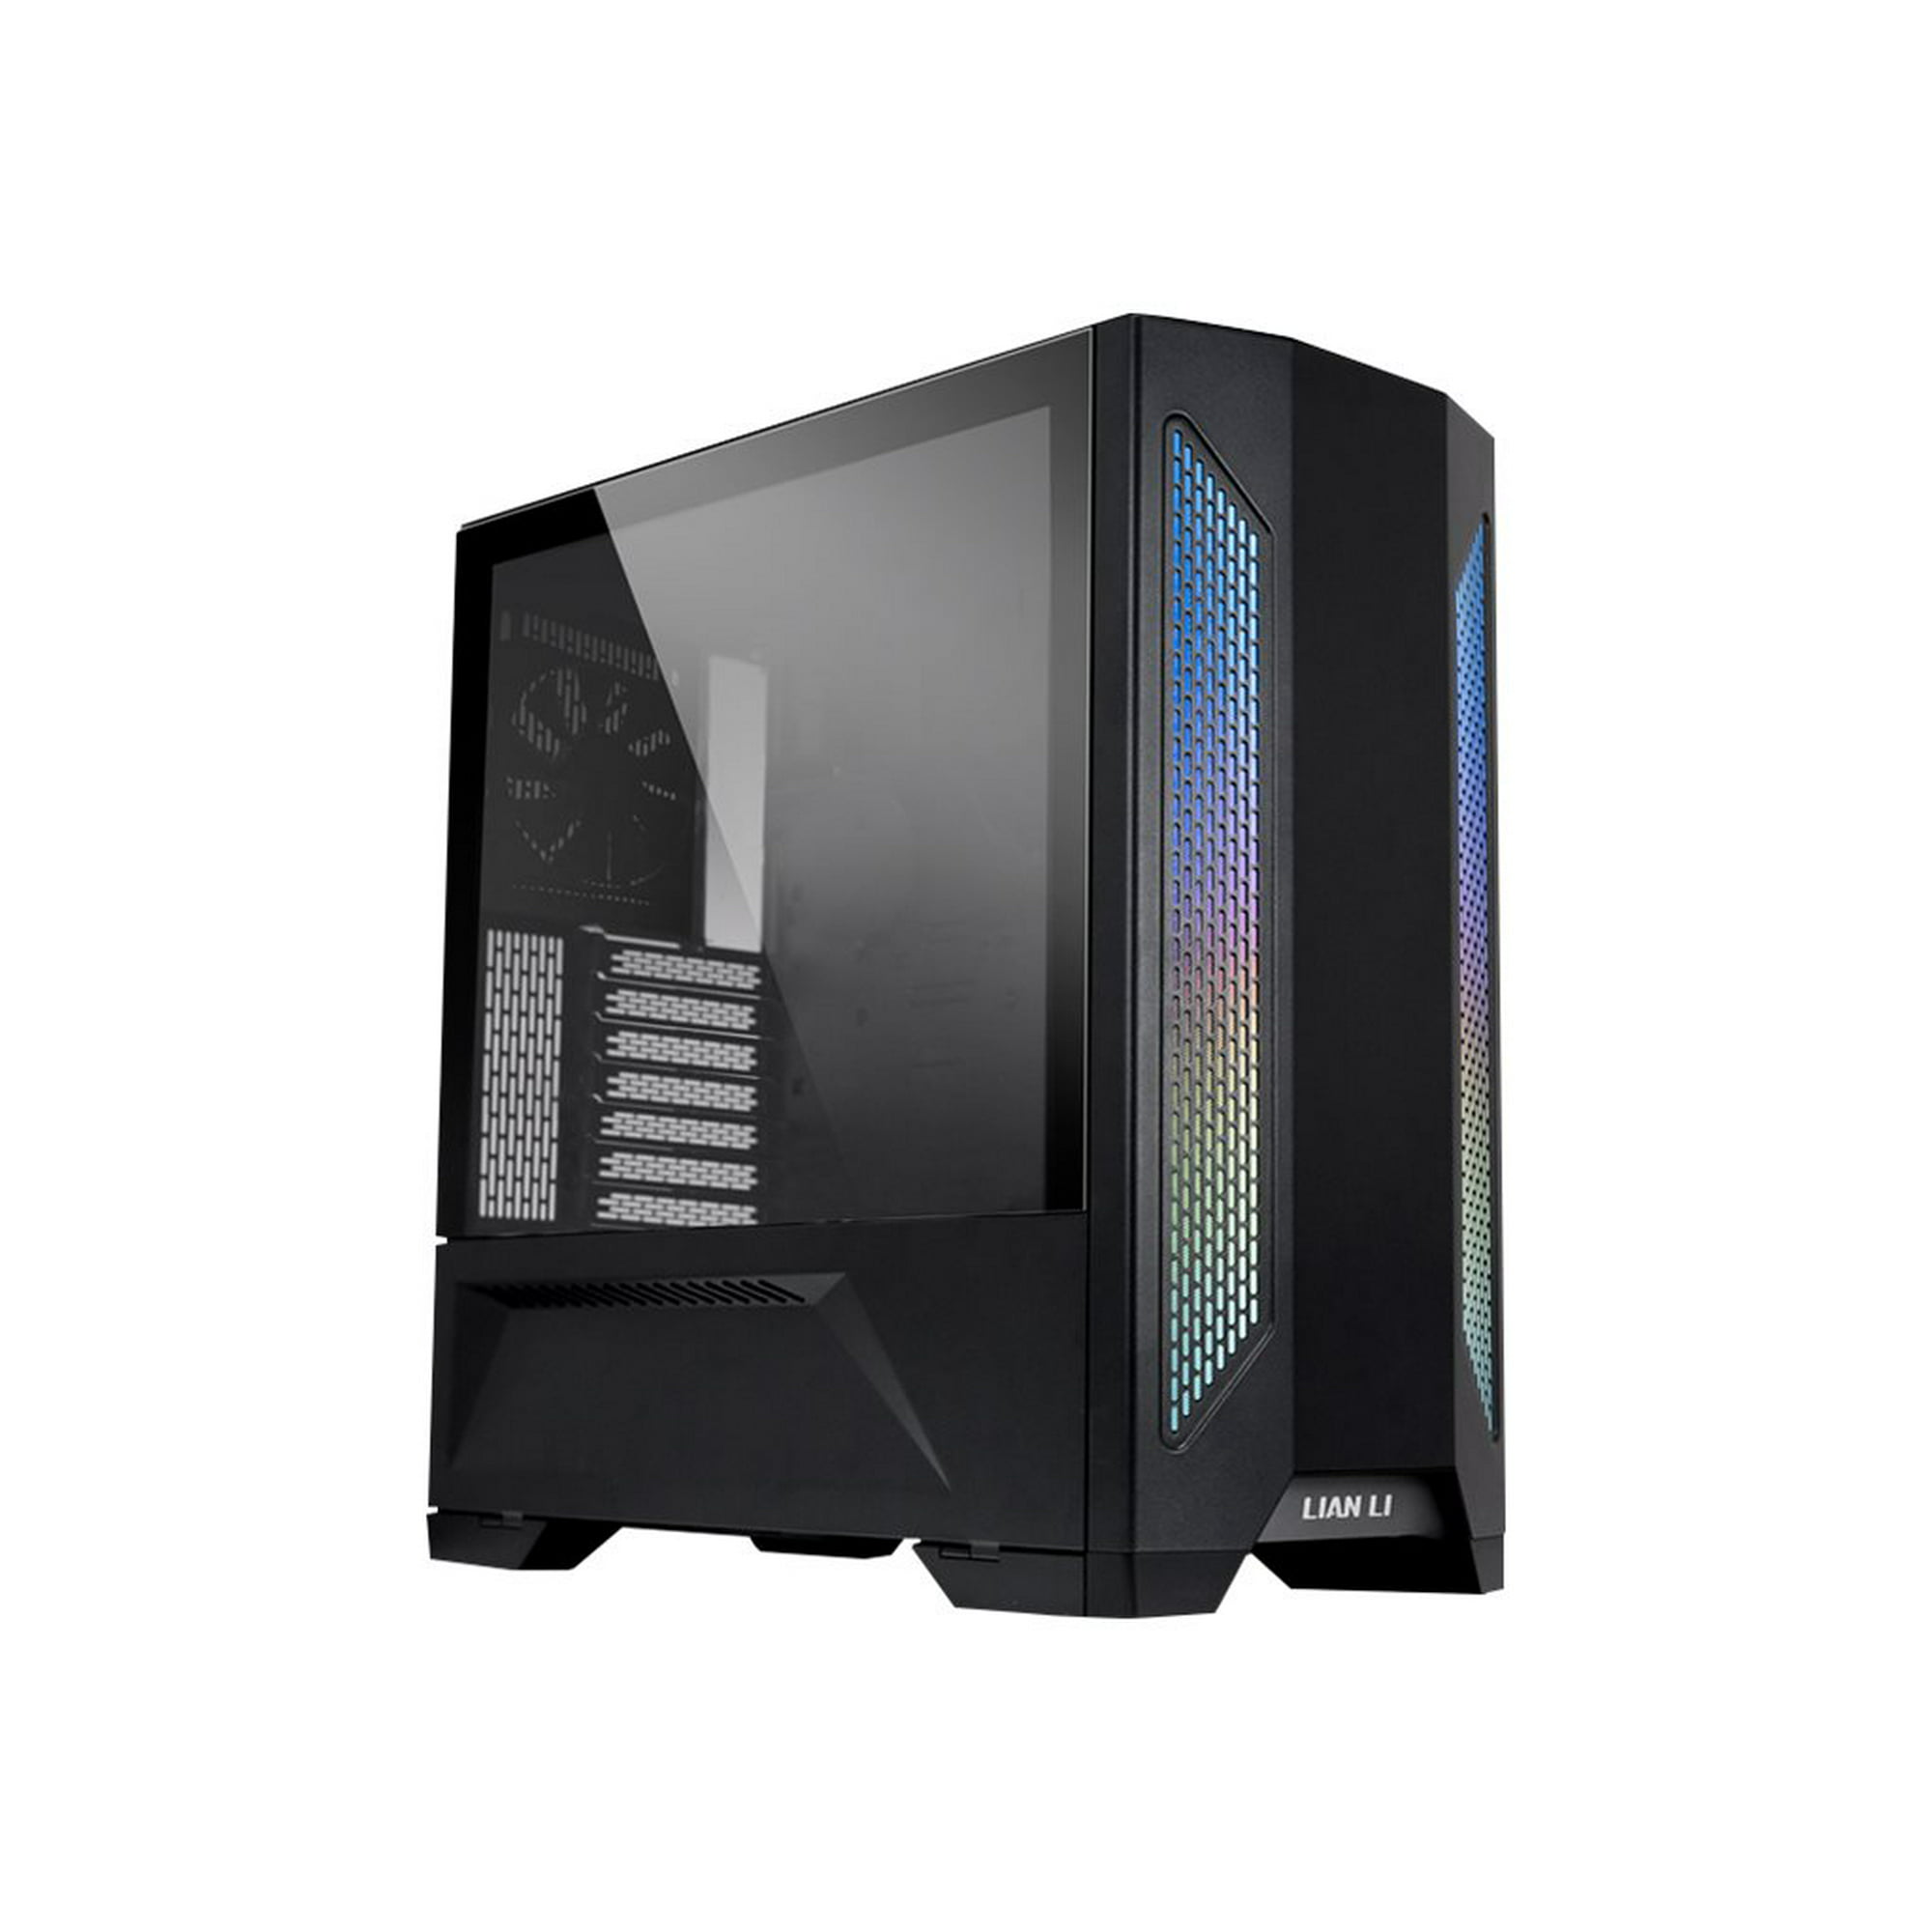 Lancool II - W - Tower - extended ATX - windowed side panel (tempered glass)  - no power supply - white - USB/Audio | Walmart Canada